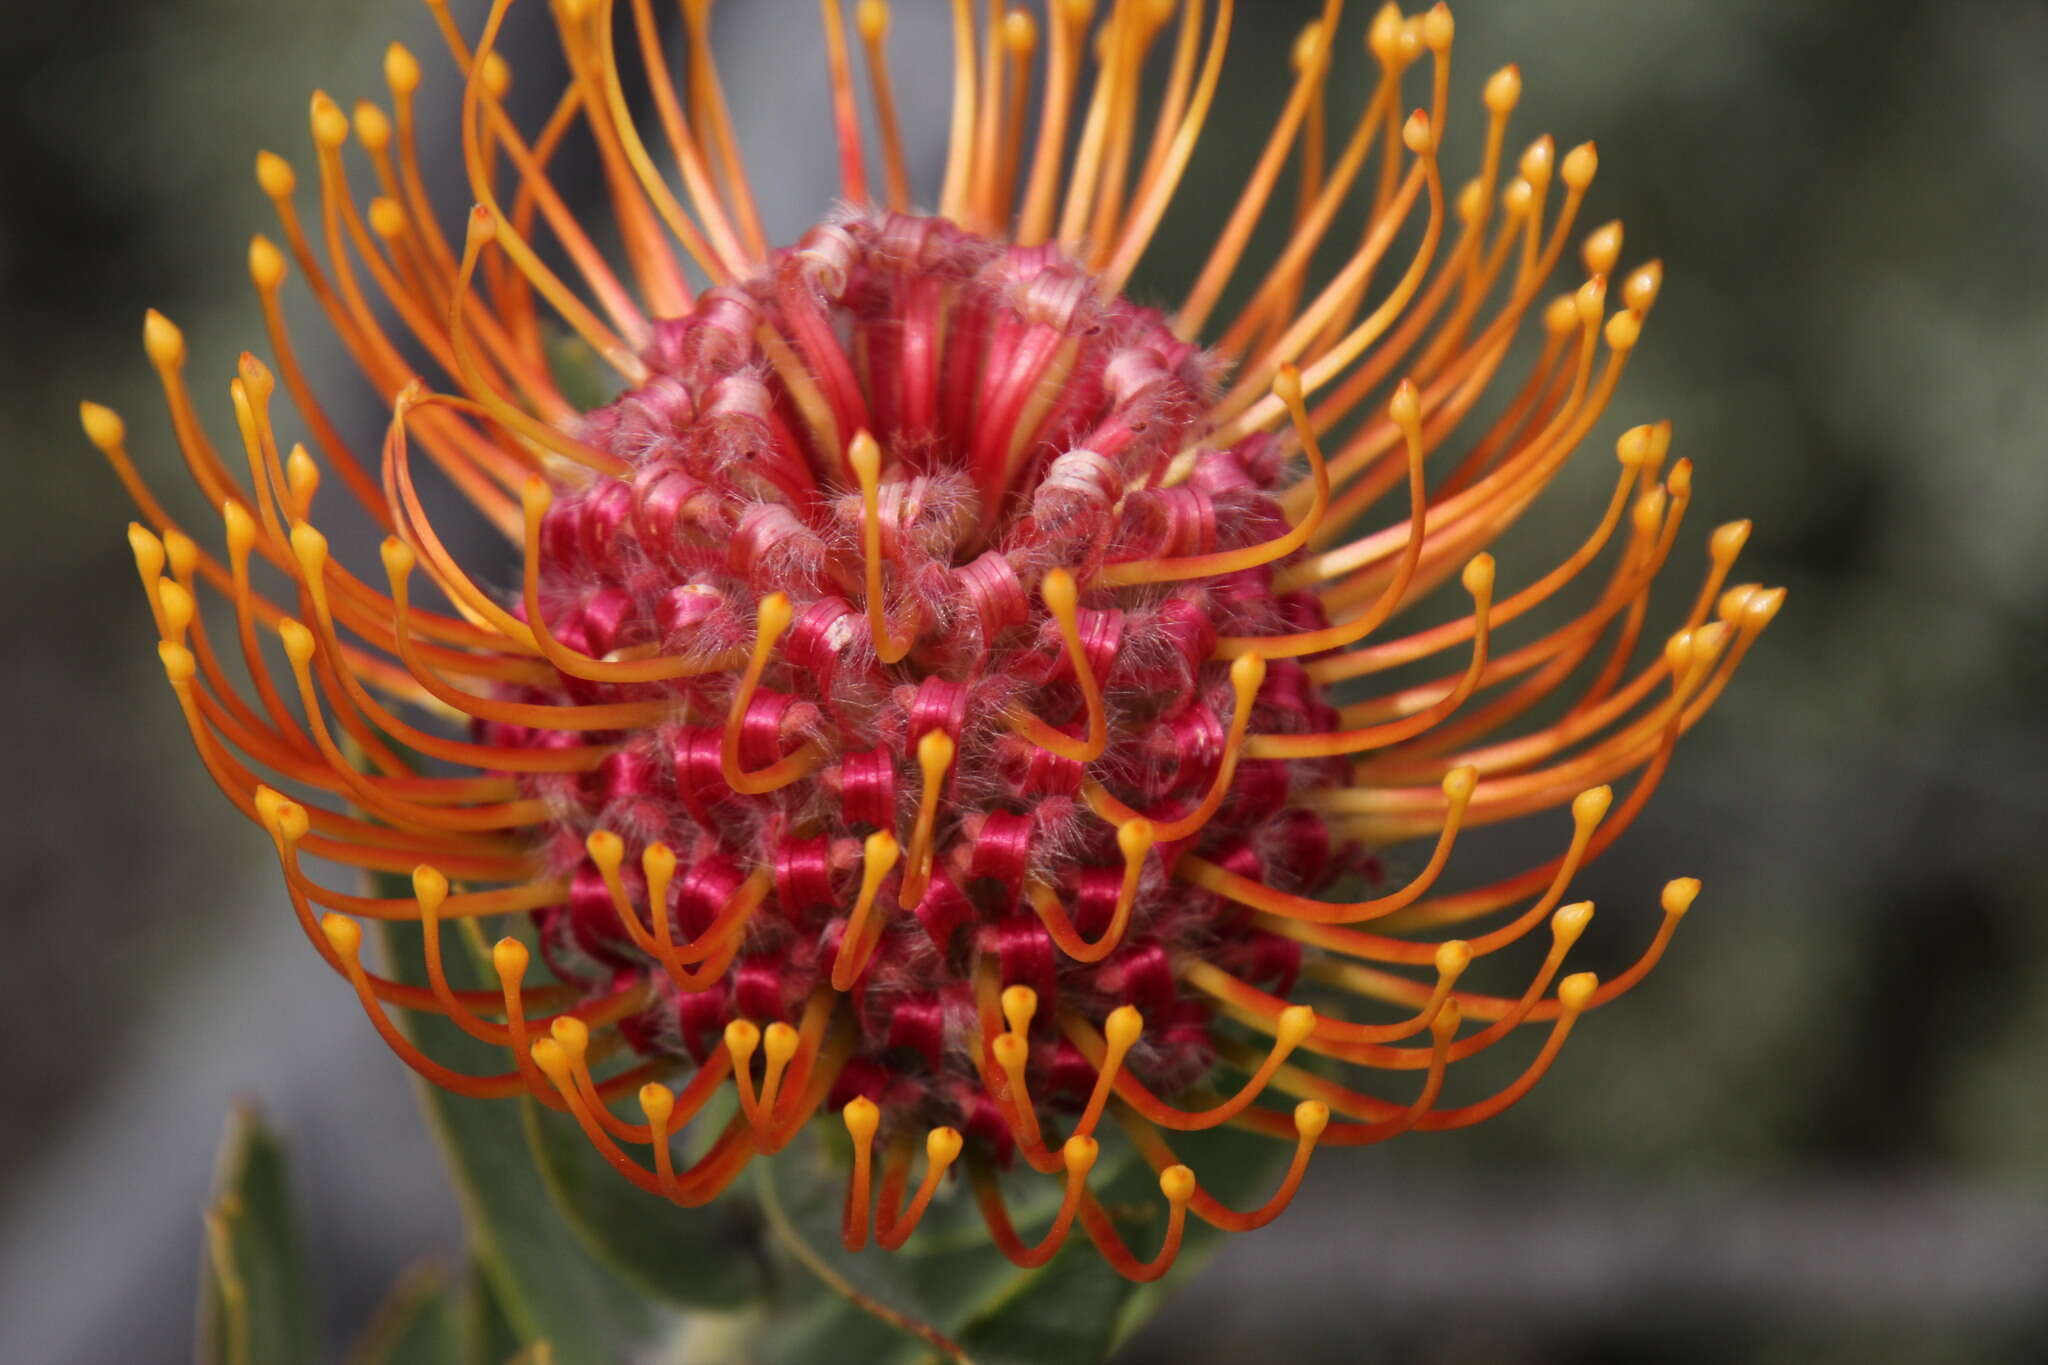 Image of silky-haired pincushion